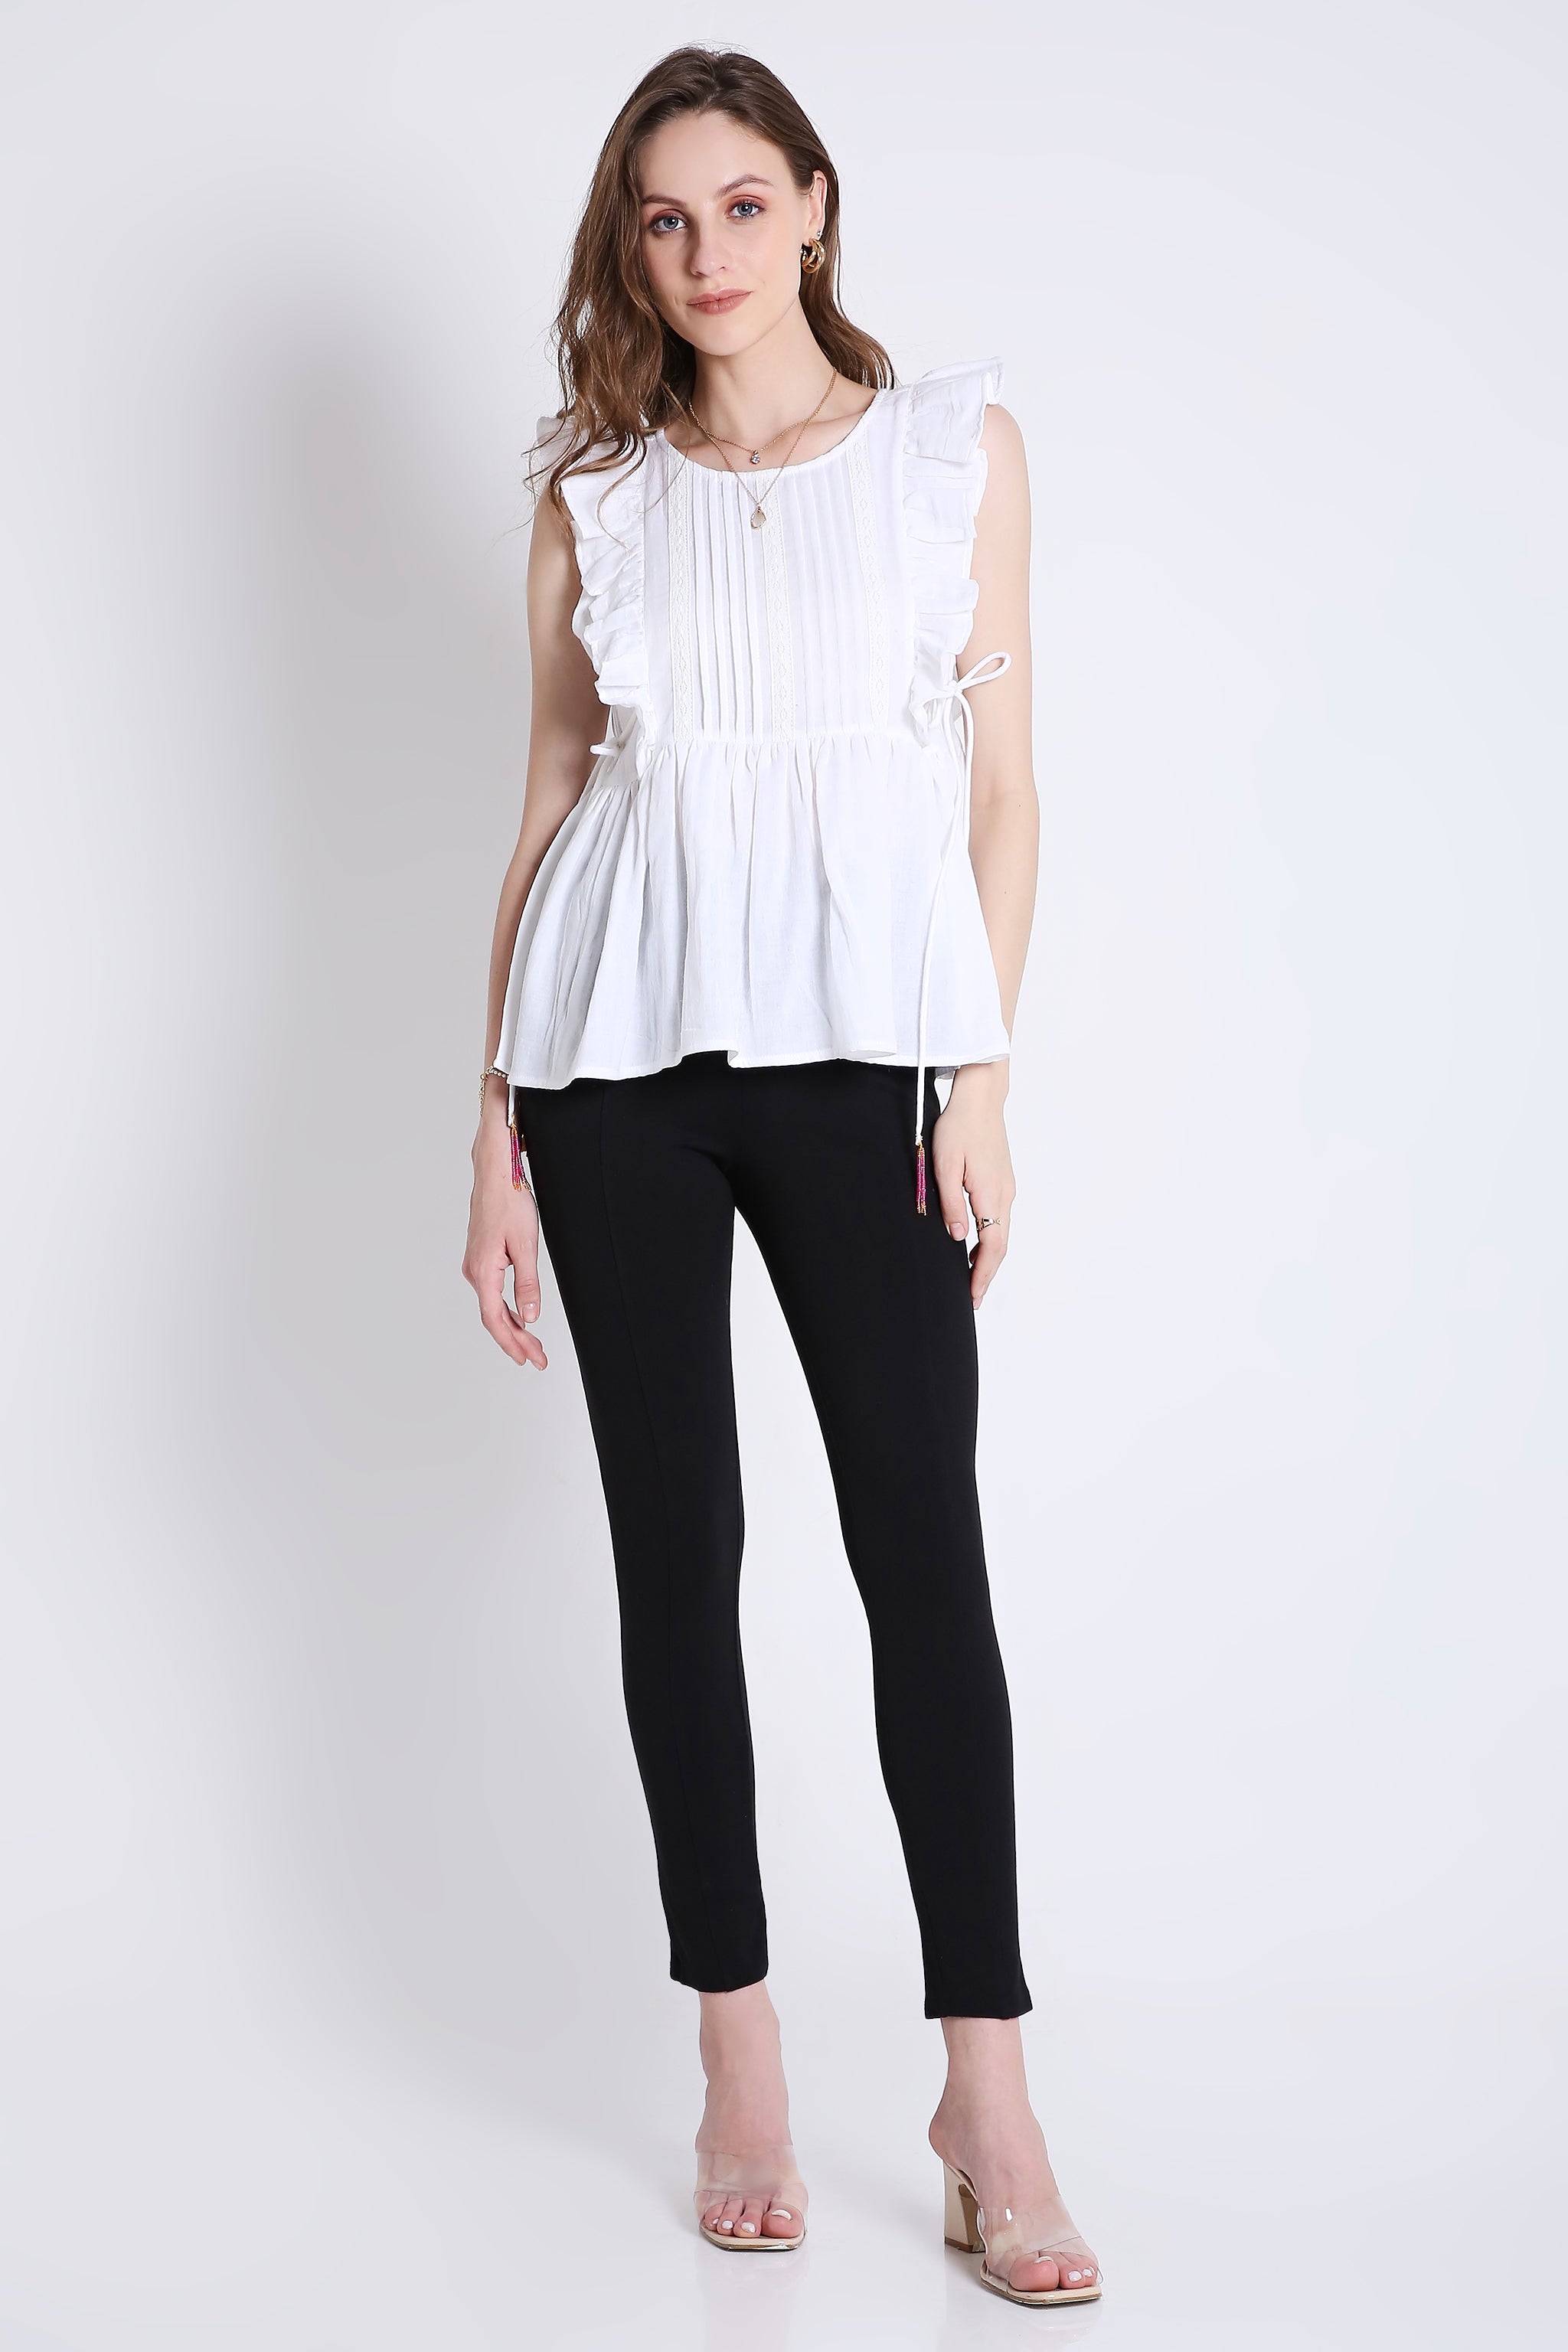 Sleeveless Top with Lace & Contrast Toggle Detail